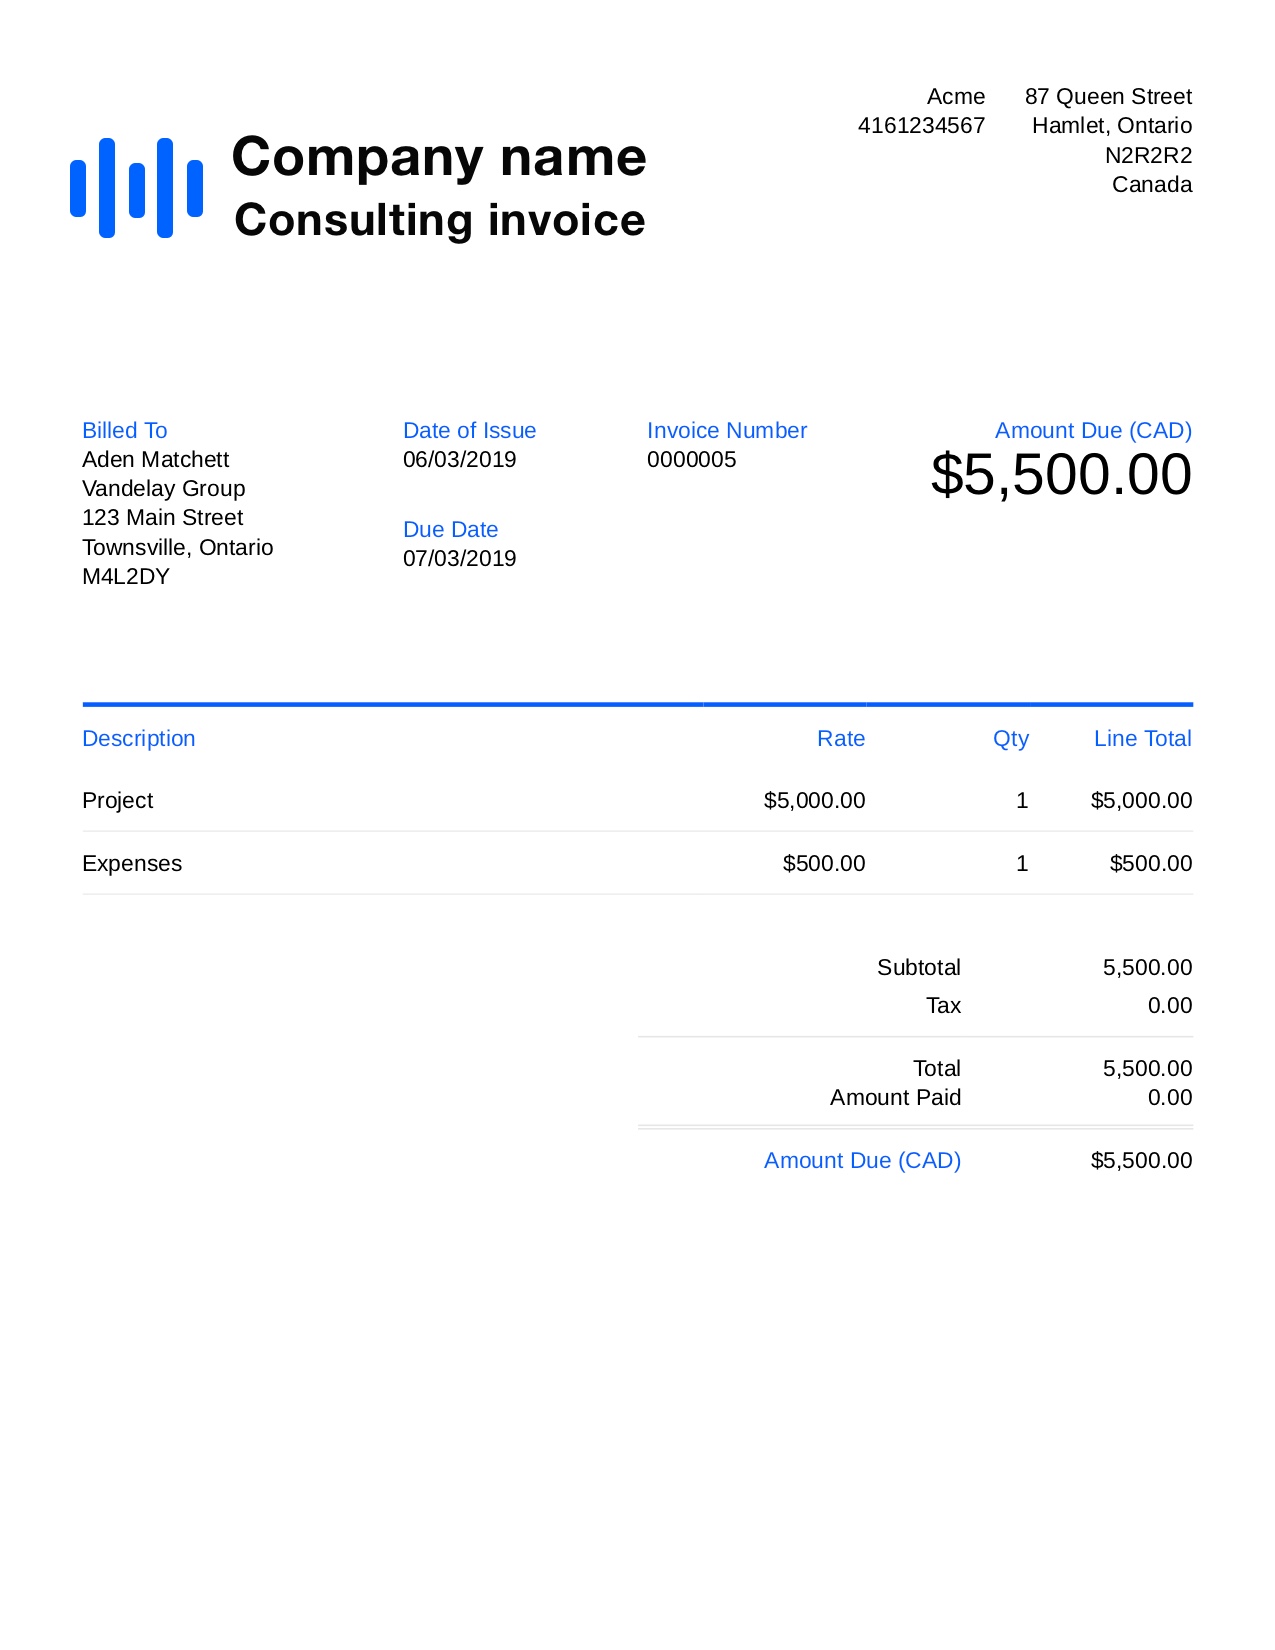 Free Consulting Invoice Template Customize and Send in 90 Seconds